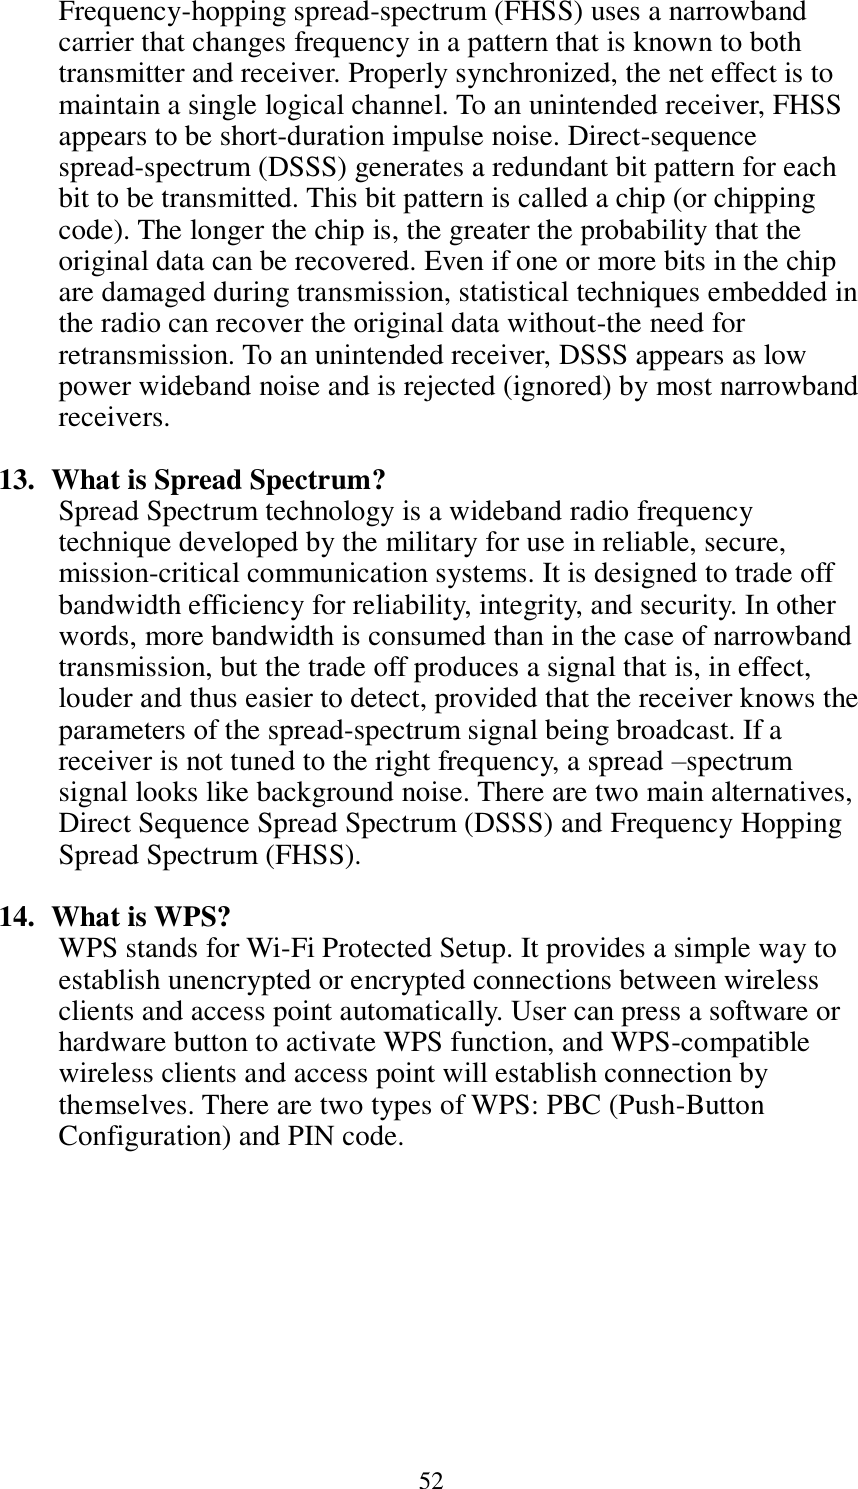  52 Frequency-hopping spread-spectrum (FHSS) uses a narrowband carrier that changes frequency in a pattern that is known to both transmitter and receiver. Properly synchronized, the net effect is to maintain a single logical channel. To an unintended receiver, FHSS appears to be short-duration impulse noise. Direct-sequence spread-spectrum (DSSS) generates a redundant bit pattern for each bit to be transmitted. This bit pattern is called a chip (or chipping code). The longer the chip is, the greater the probability that the original data can be recovered. Even if one or more bits in the chip are damaged during transmission, statistical techniques embedded in the radio can recover the original data without-the need for retransmission. To an unintended receiver, DSSS appears as low power wideband noise and is rejected (ignored) by most narrowband receivers.  13.   What is Spread Spectrum? Spread Spectrum technology is a wideband radio frequency technique developed by the military for use in reliable, secure, mission-critical communication systems. It is designed to trade off bandwidth efficiency for reliability, integrity, and security. In other words, more bandwidth is consumed than in the case of narrowband transmission, but the trade off produces a signal that is, in effect, louder and thus easier to detect, provided that the receiver knows the parameters of the spread-spectrum signal being broadcast. If a receiver is not tuned to the right frequency, a spread –spectrum signal looks like background noise. There are two main alternatives, Direct Sequence Spread Spectrum (DSSS) and Frequency Hopping Spread Spectrum (FHSS).  14.   What is WPS? WPS stands for Wi-Fi Protected Setup. It provides a simple way to establish unencrypted or encrypted connections between wireless clients and access point automatically. User can press a software or hardware button to activate WPS function, and WPS-compatible wireless clients and access point will establish connection by themselves. There are two types of WPS: PBC (Push-Button Configuration) and PIN code.  